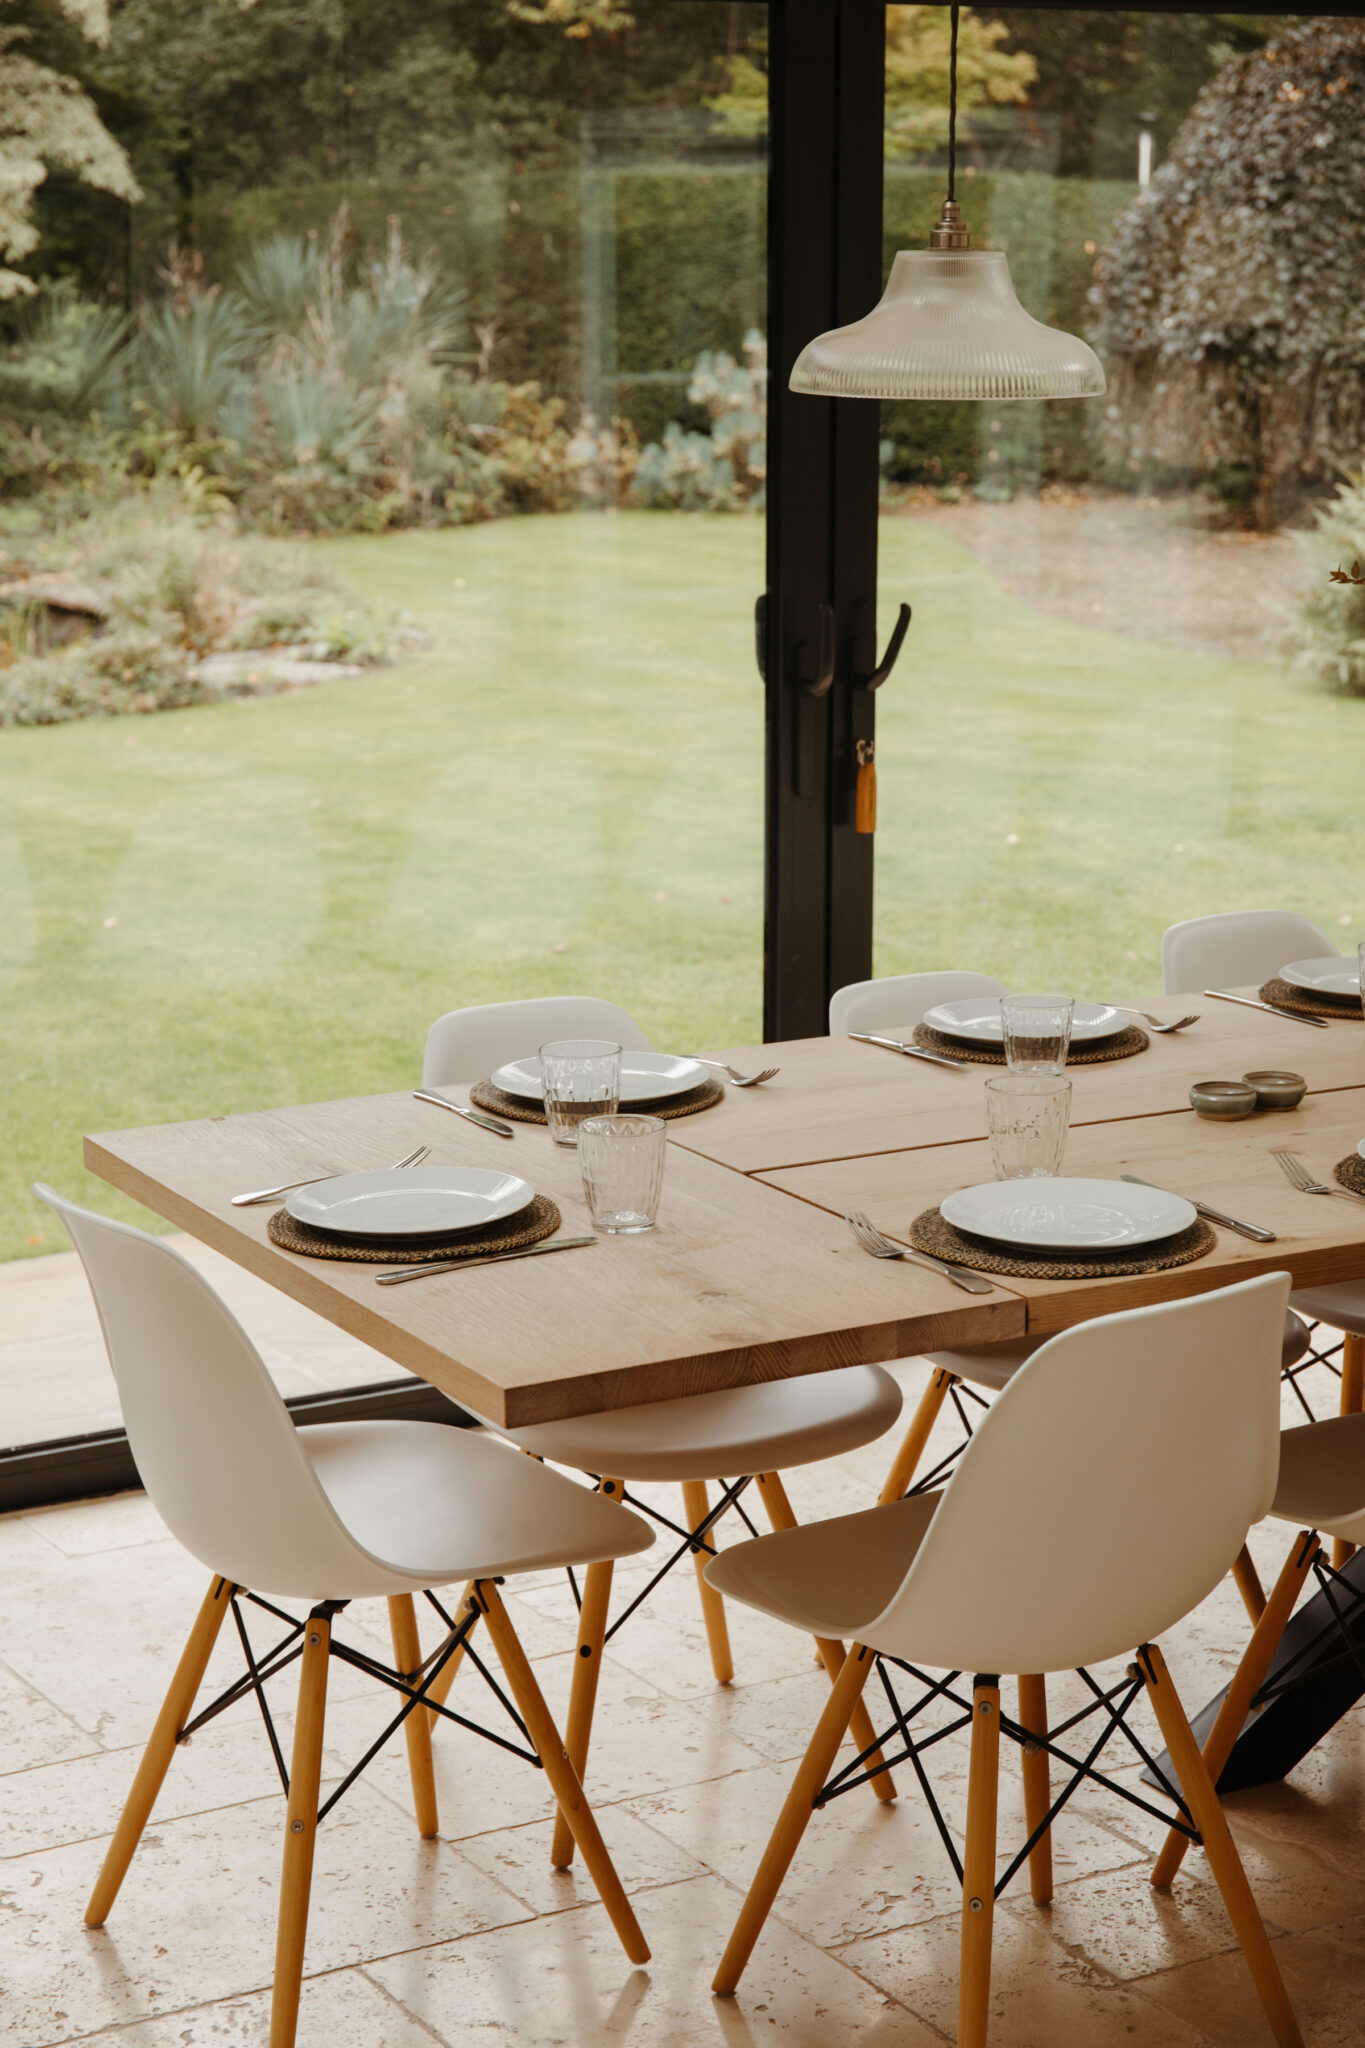 Dining table looking on to the garden through large glass windows